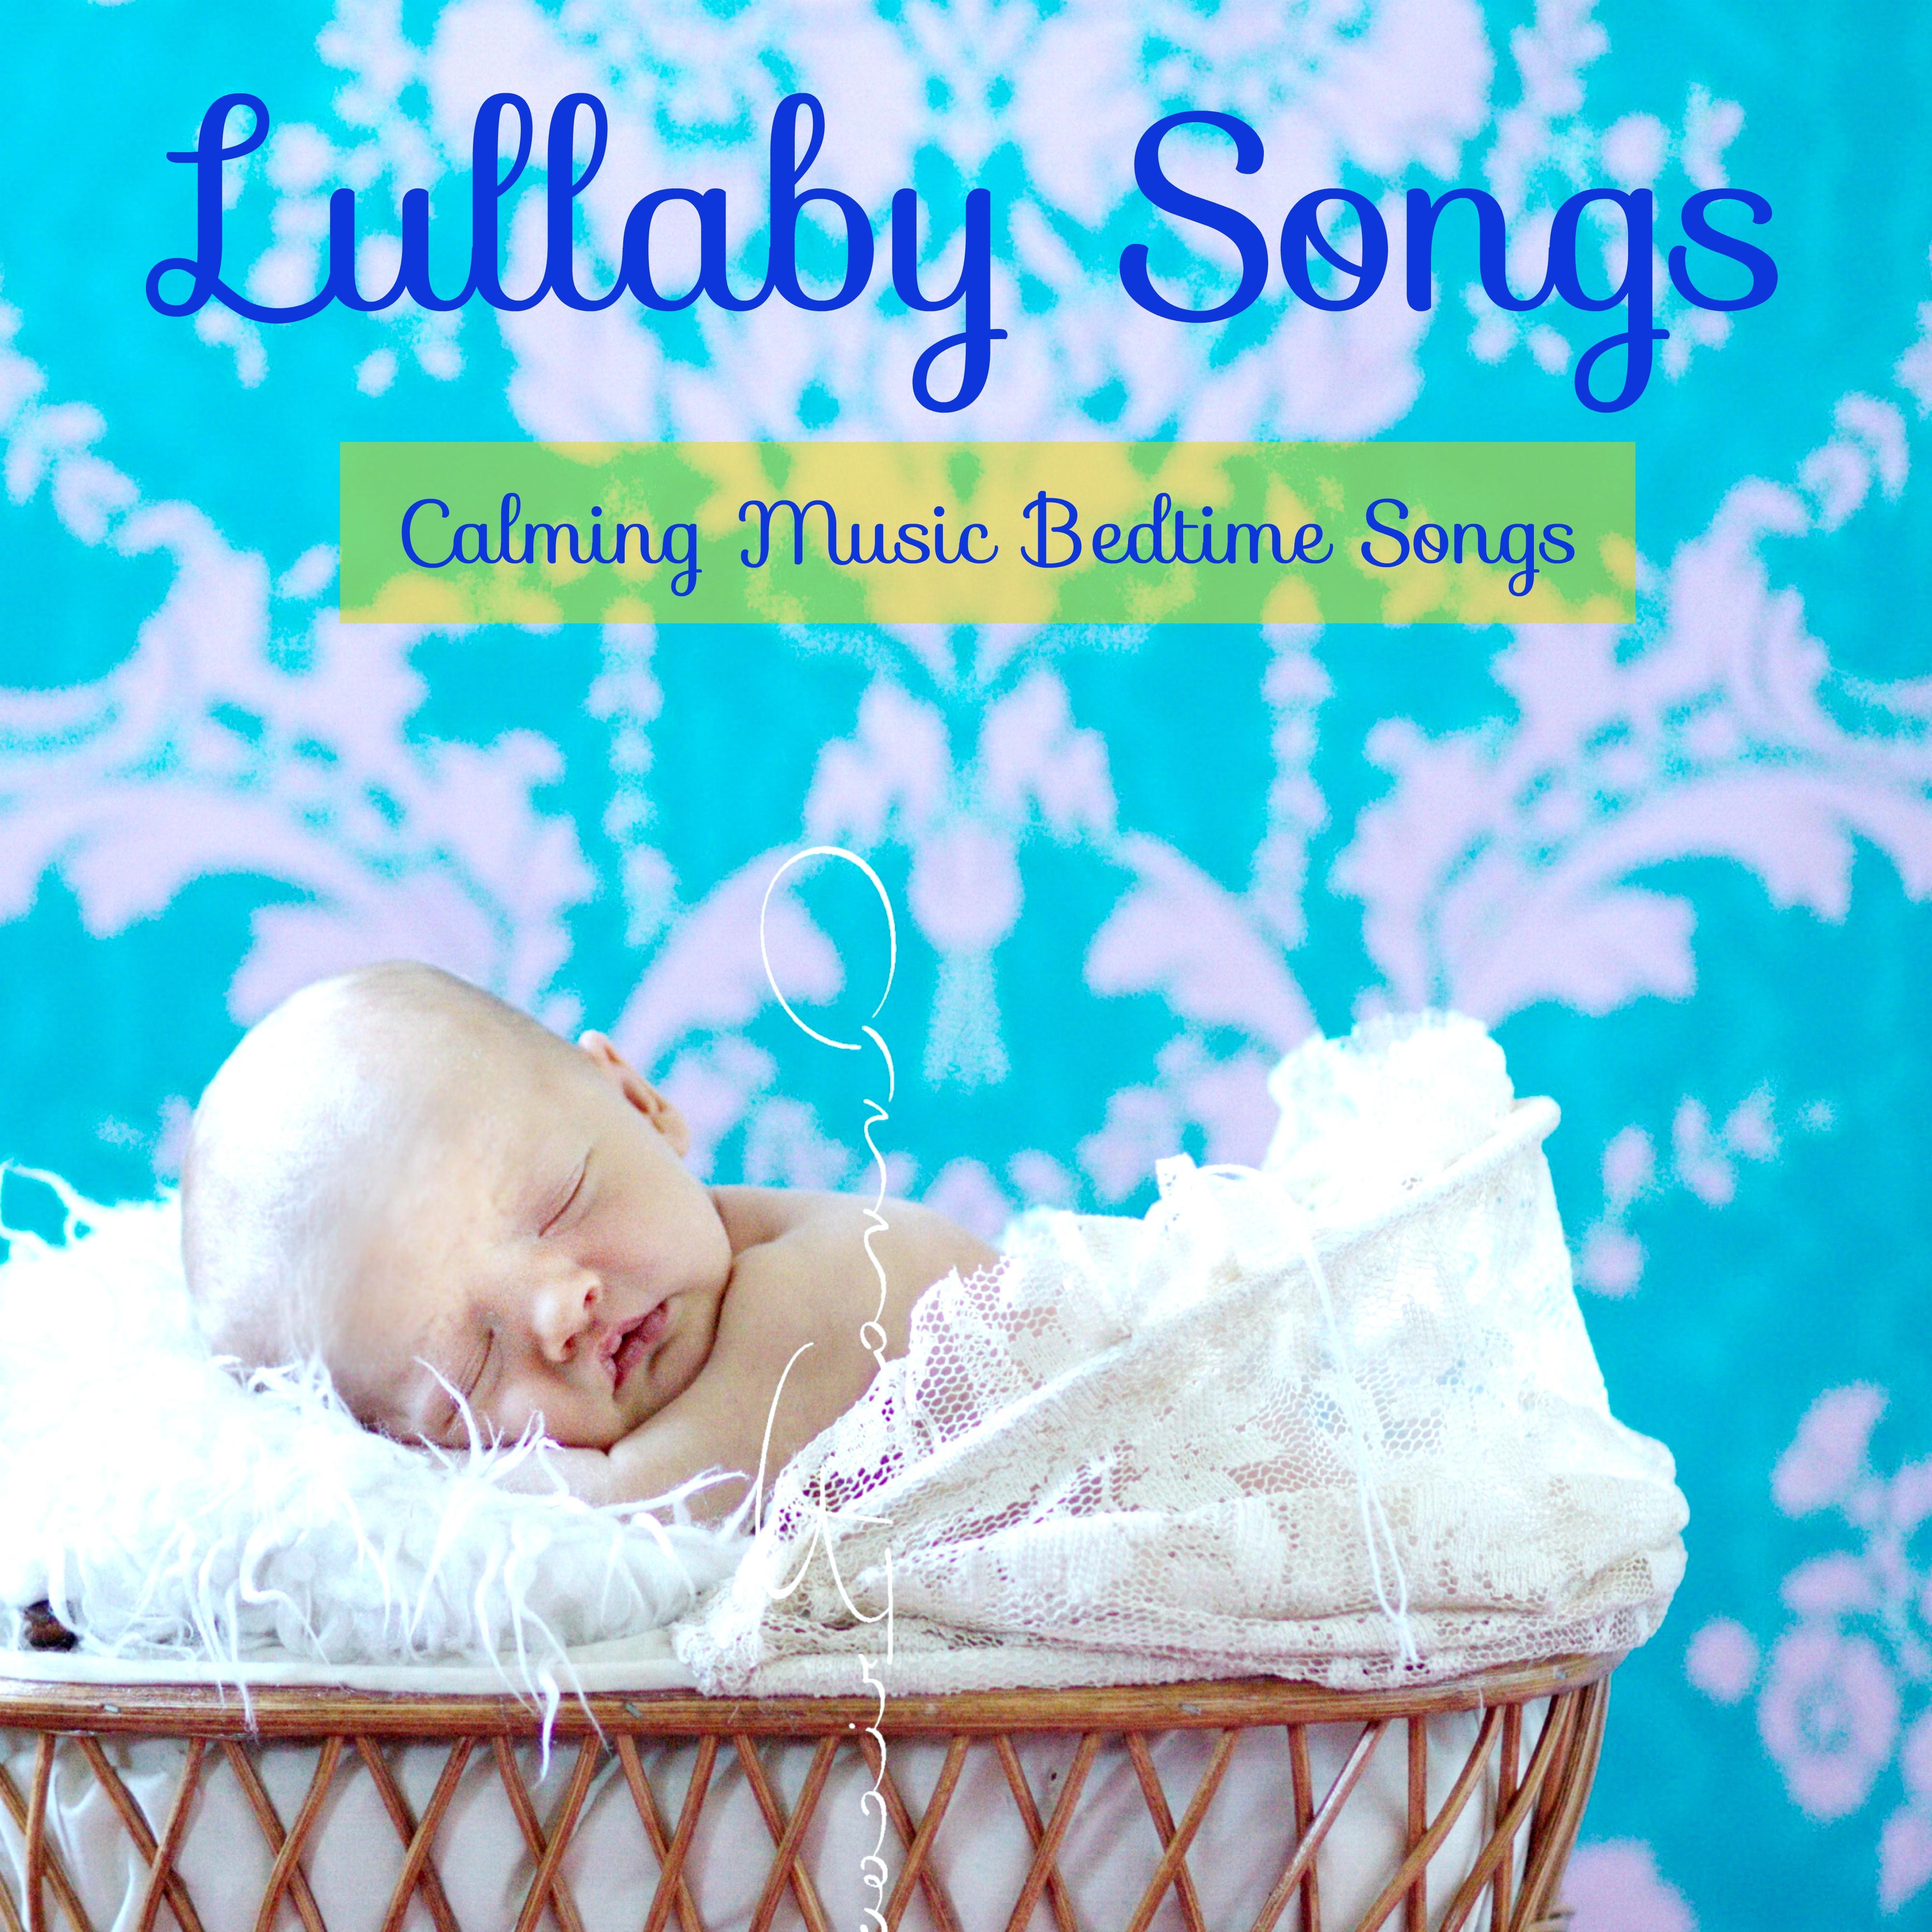 Lullaby Songs – Calming Music Bedtime Songs, Toddler Songs to Get Baby to Sleep Through the Night, Classical Baby Lullabies